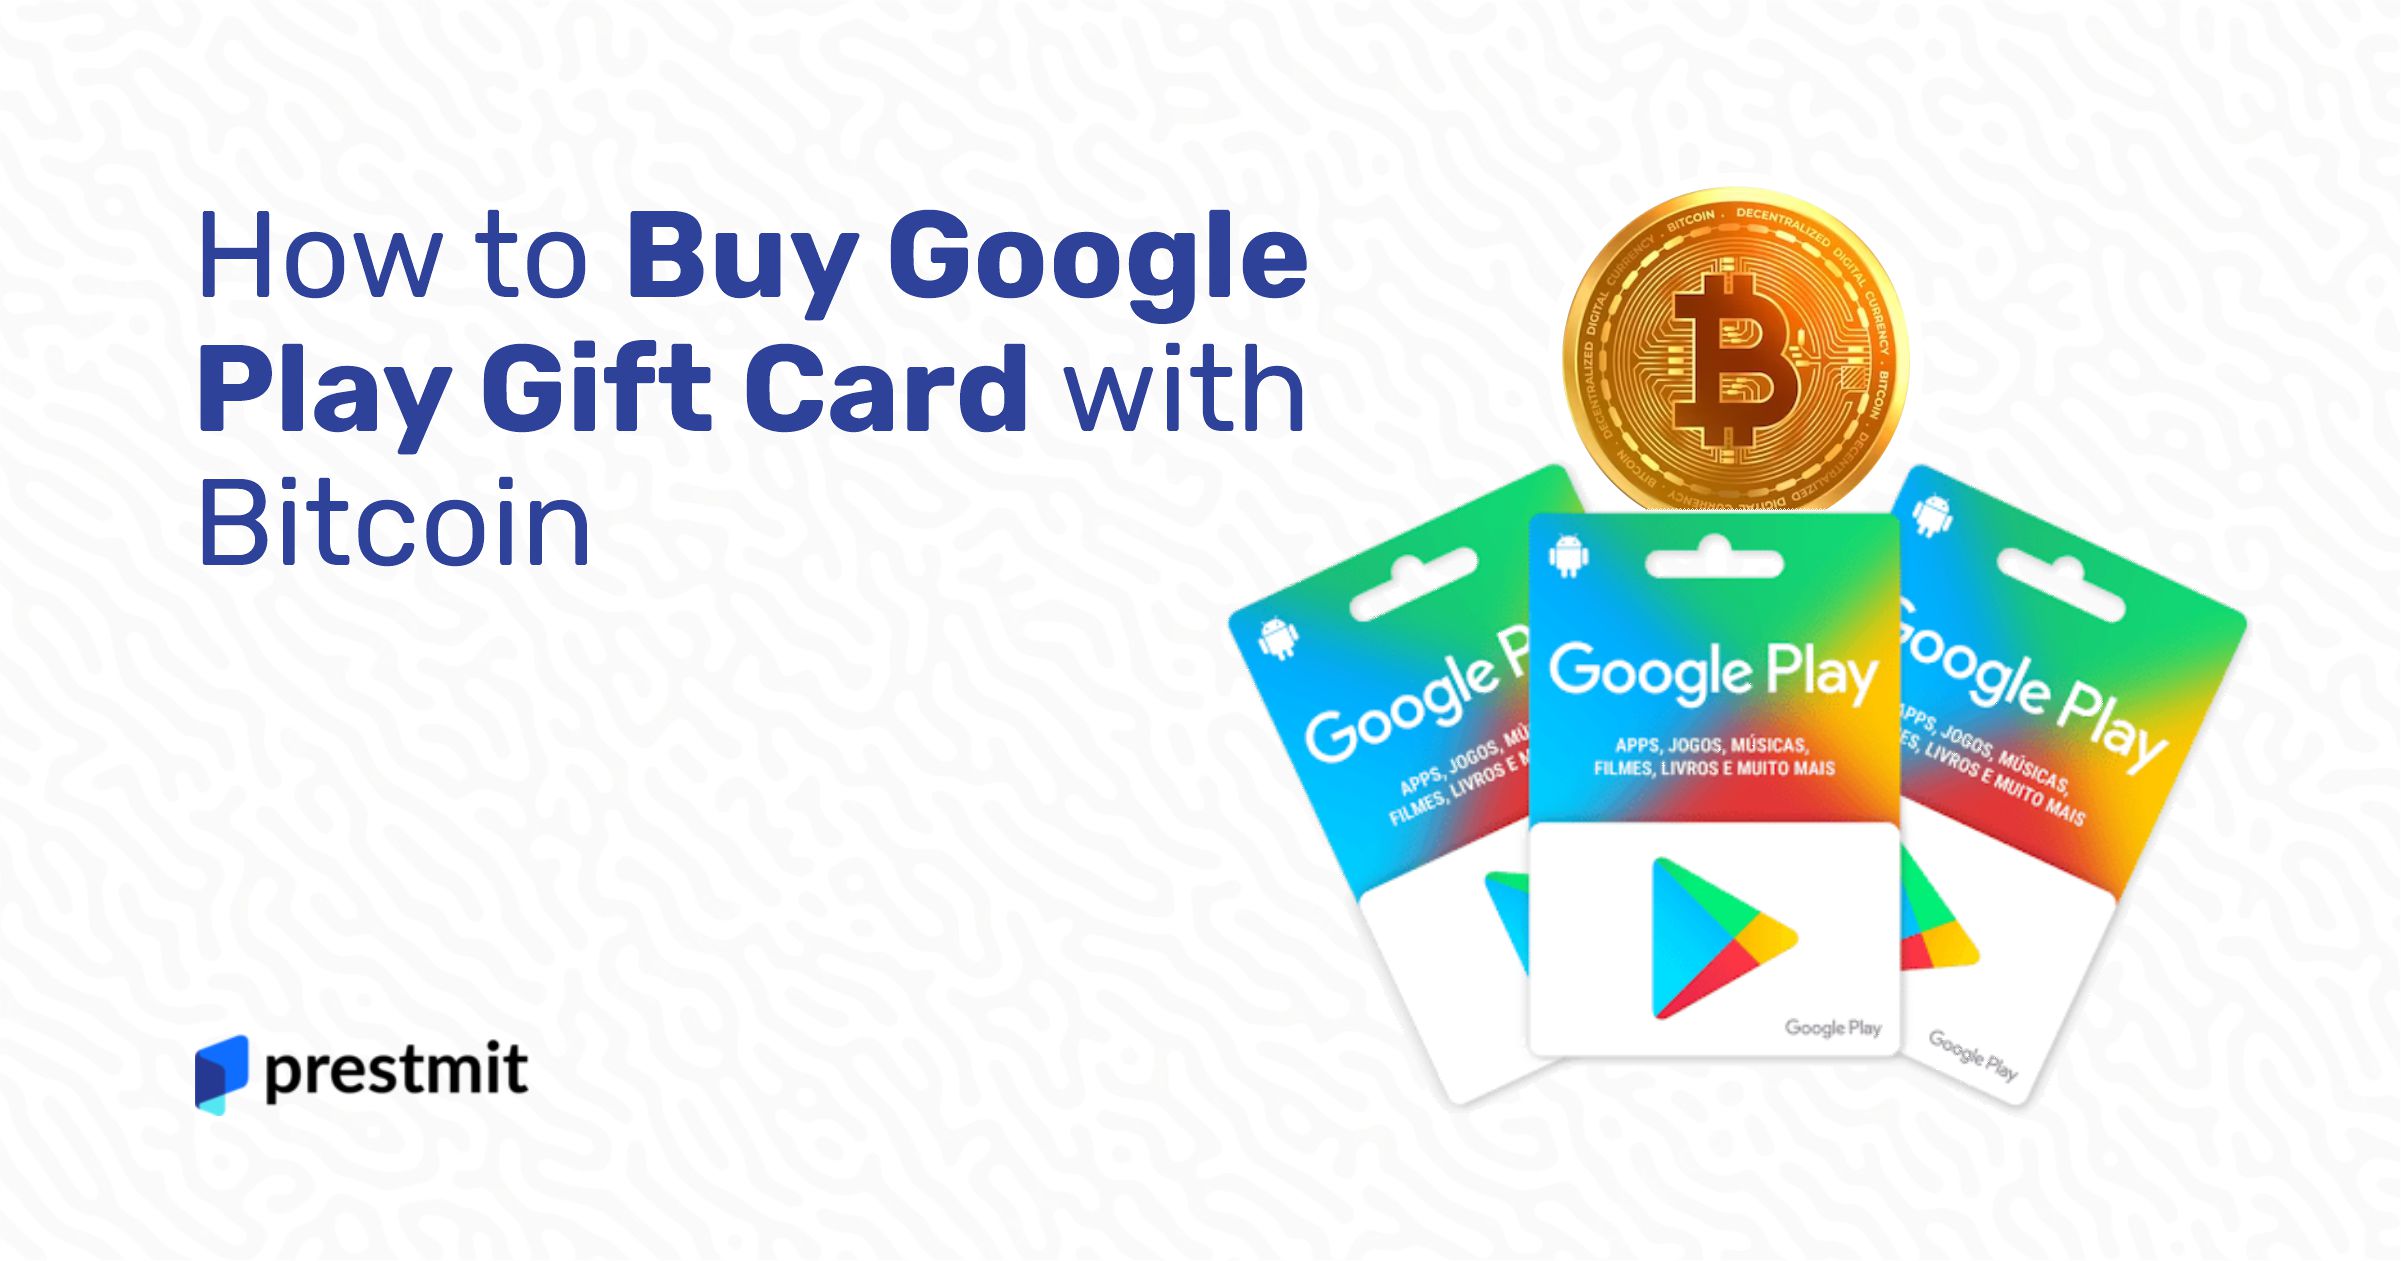 Google Play Redeem Code: How to Buy Google Play Gift Card Recharge Code  Online with Discount Offers - MySmartPrice